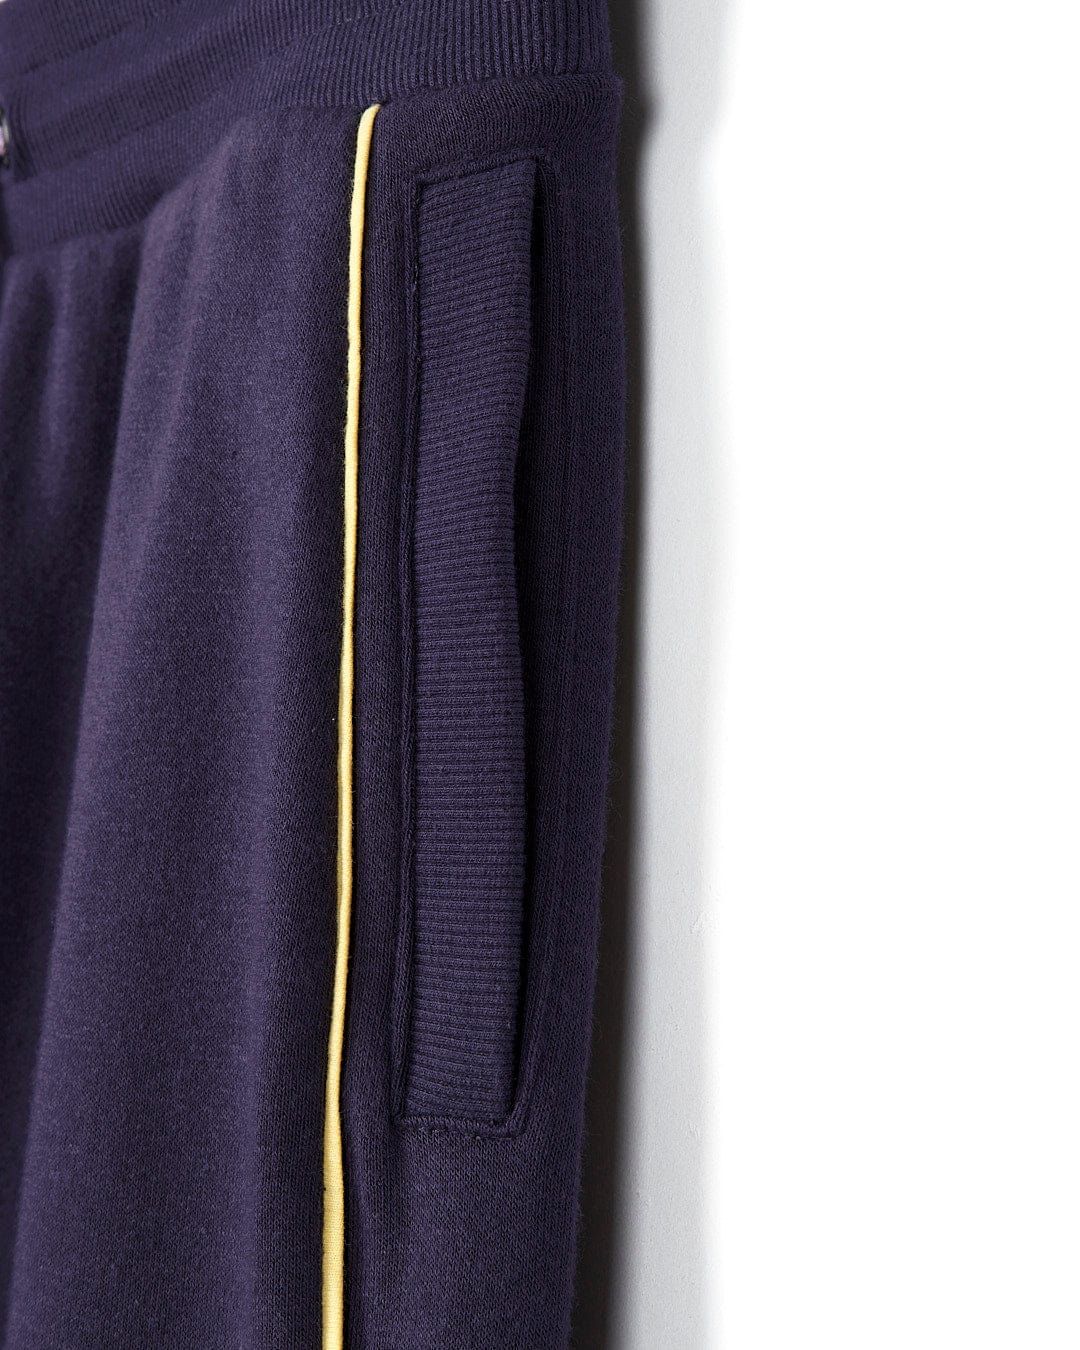 A pair of Saltrock sweatpants with a yellow stripe on the side.